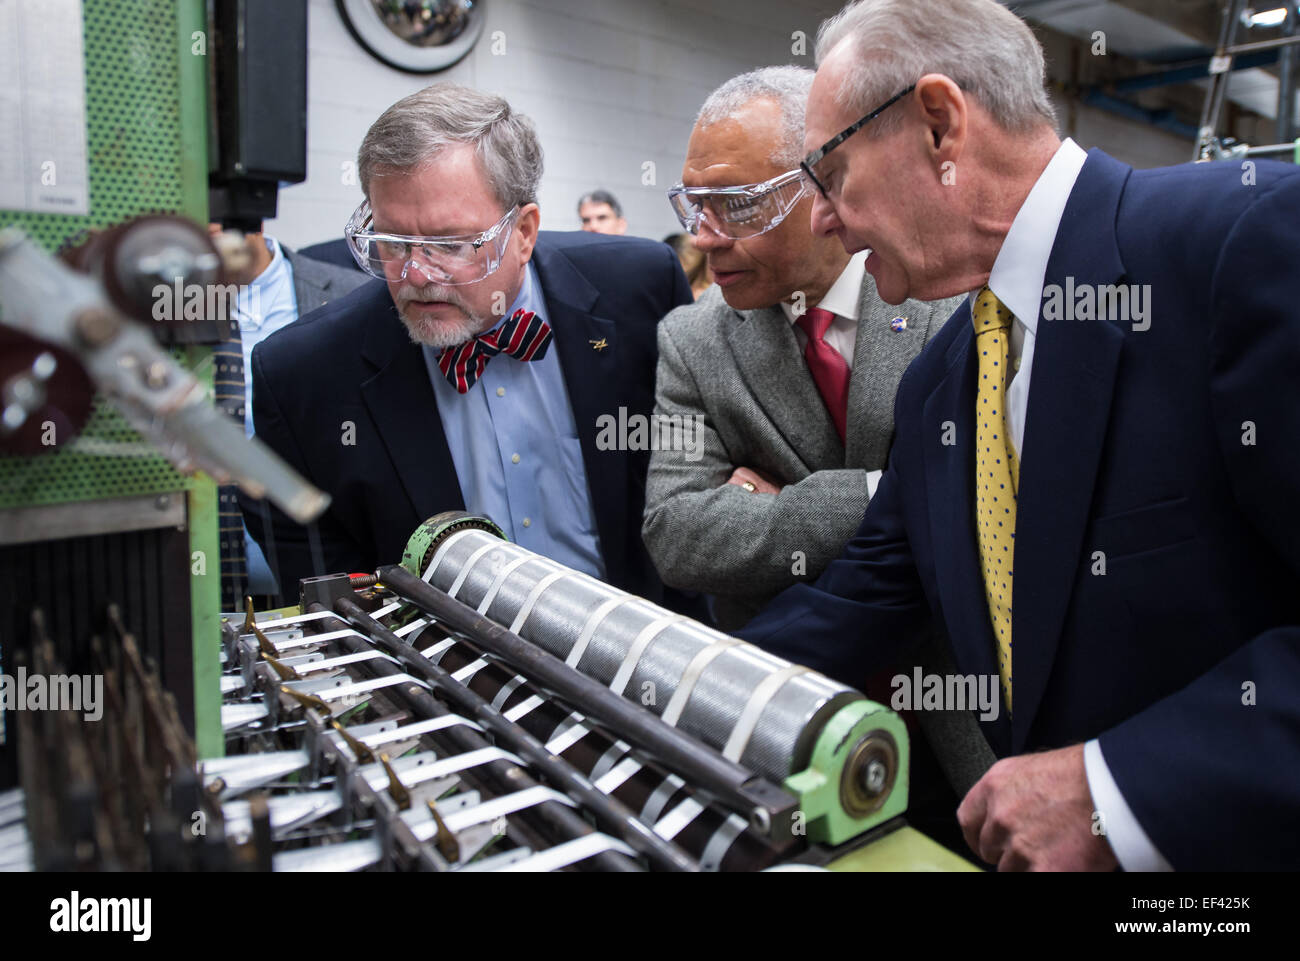 Vice President and Orion program manager for Lockheed Martin space systems company Mike Hawes, left, NASA Administrator Charles Bolden, center, and Bally Ribbon Mills (BRM) President Ray Harries talk during a tour of the BRM manufacturing facility on Friday, Jan. 9, 2015 in Bally, PA. BRM is weaving the multifunctional 3D thermal protection system padding used to insulate and protect NASA's Orion spacecraft. NASA's recently-tested Orion spacecraft will carry astronauts to Mars and return them safely back to Earth with the help of BRM technology. New woven composite materials are an advanced sp Stock Photo